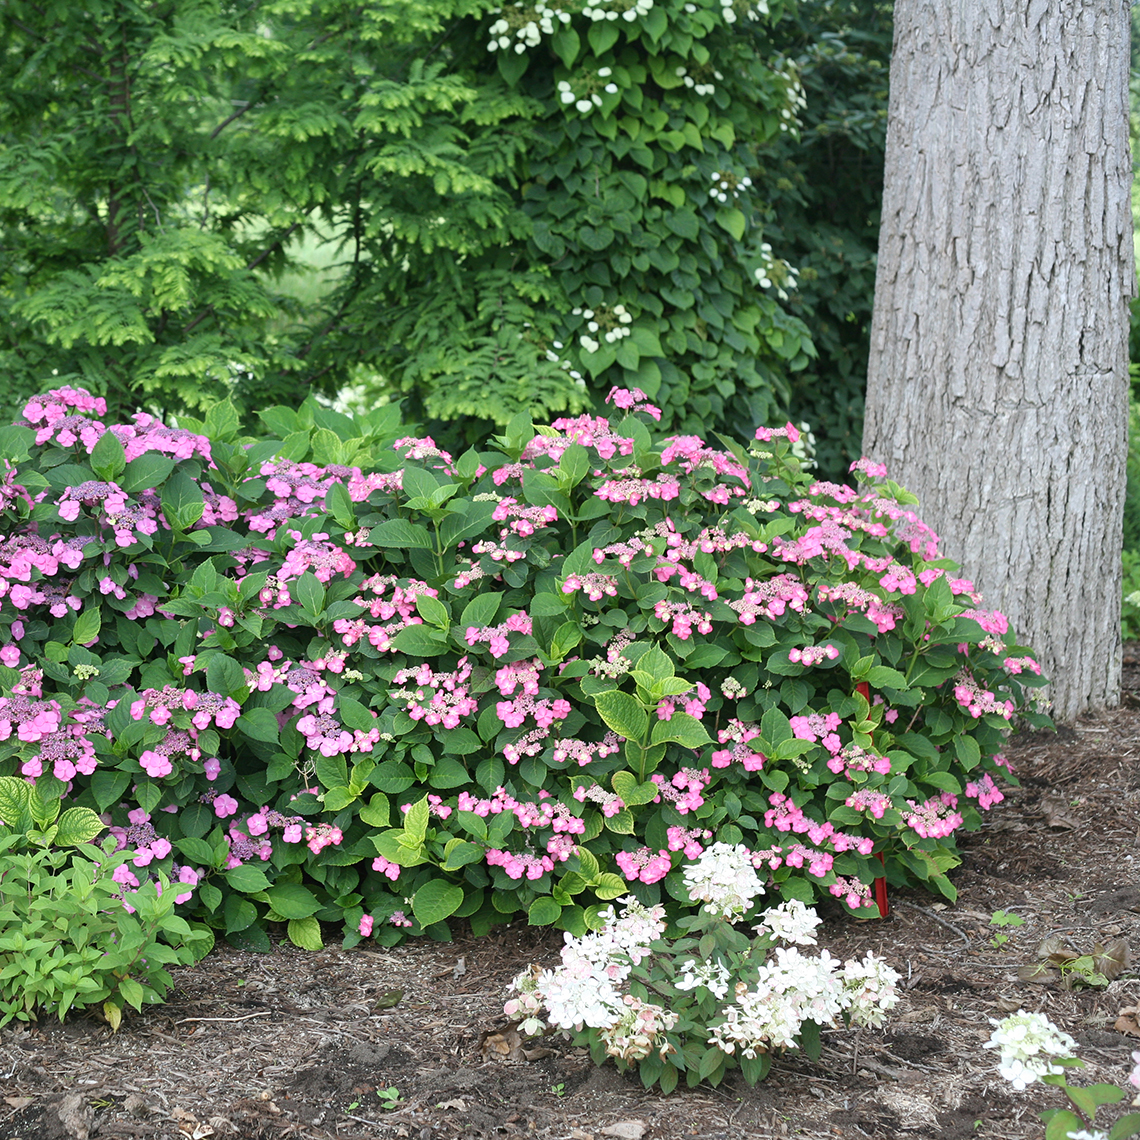 Two specimens of Tuff Stuff Red mountain hydrangea blooming in the landscape near a tree